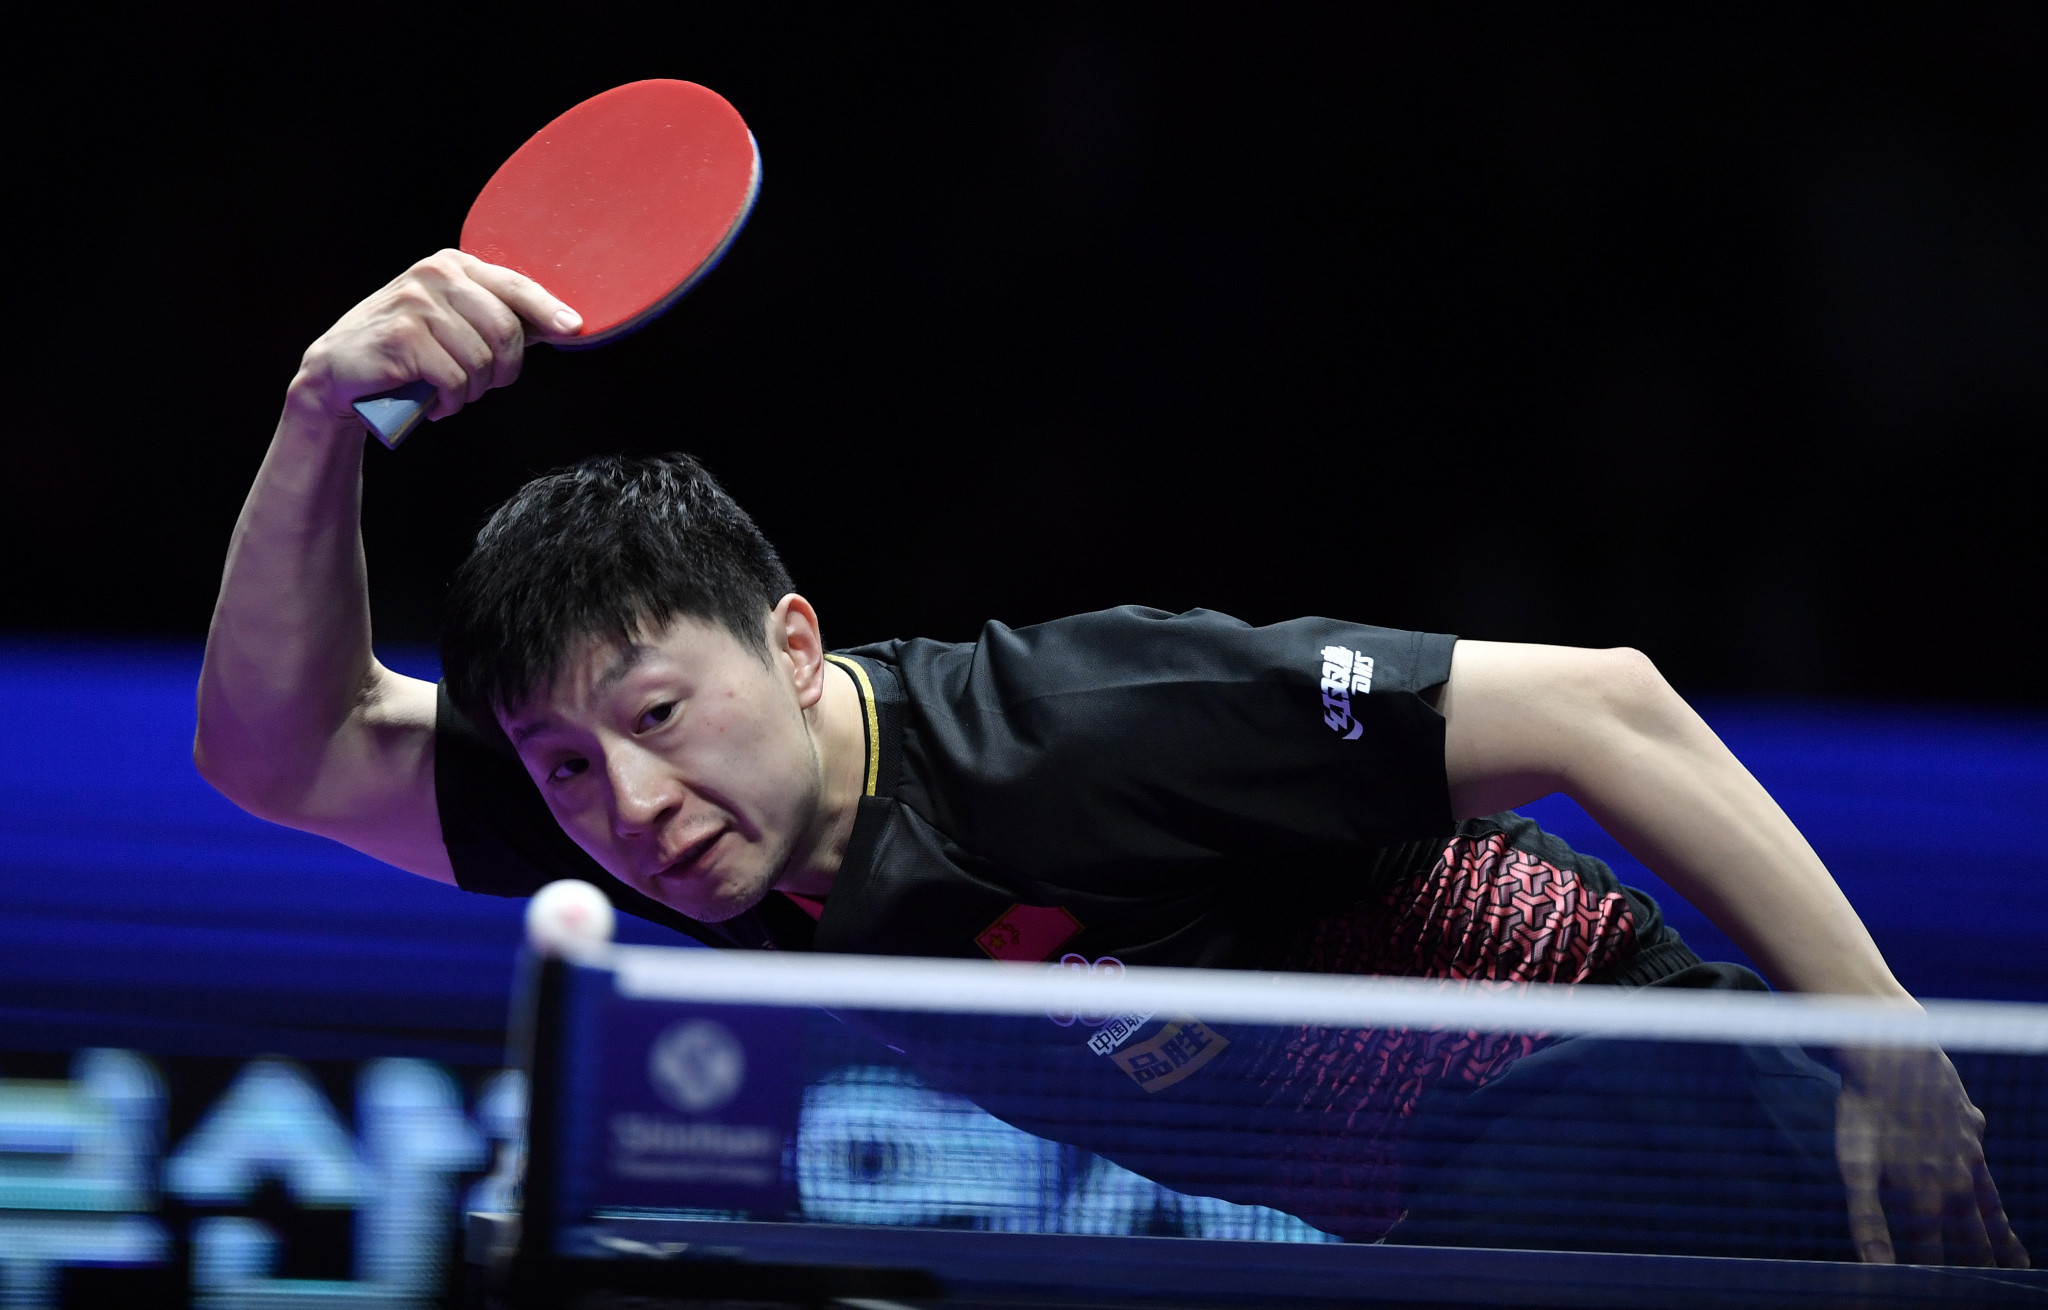 Table tennis attracts one million new social-media fans in 2019